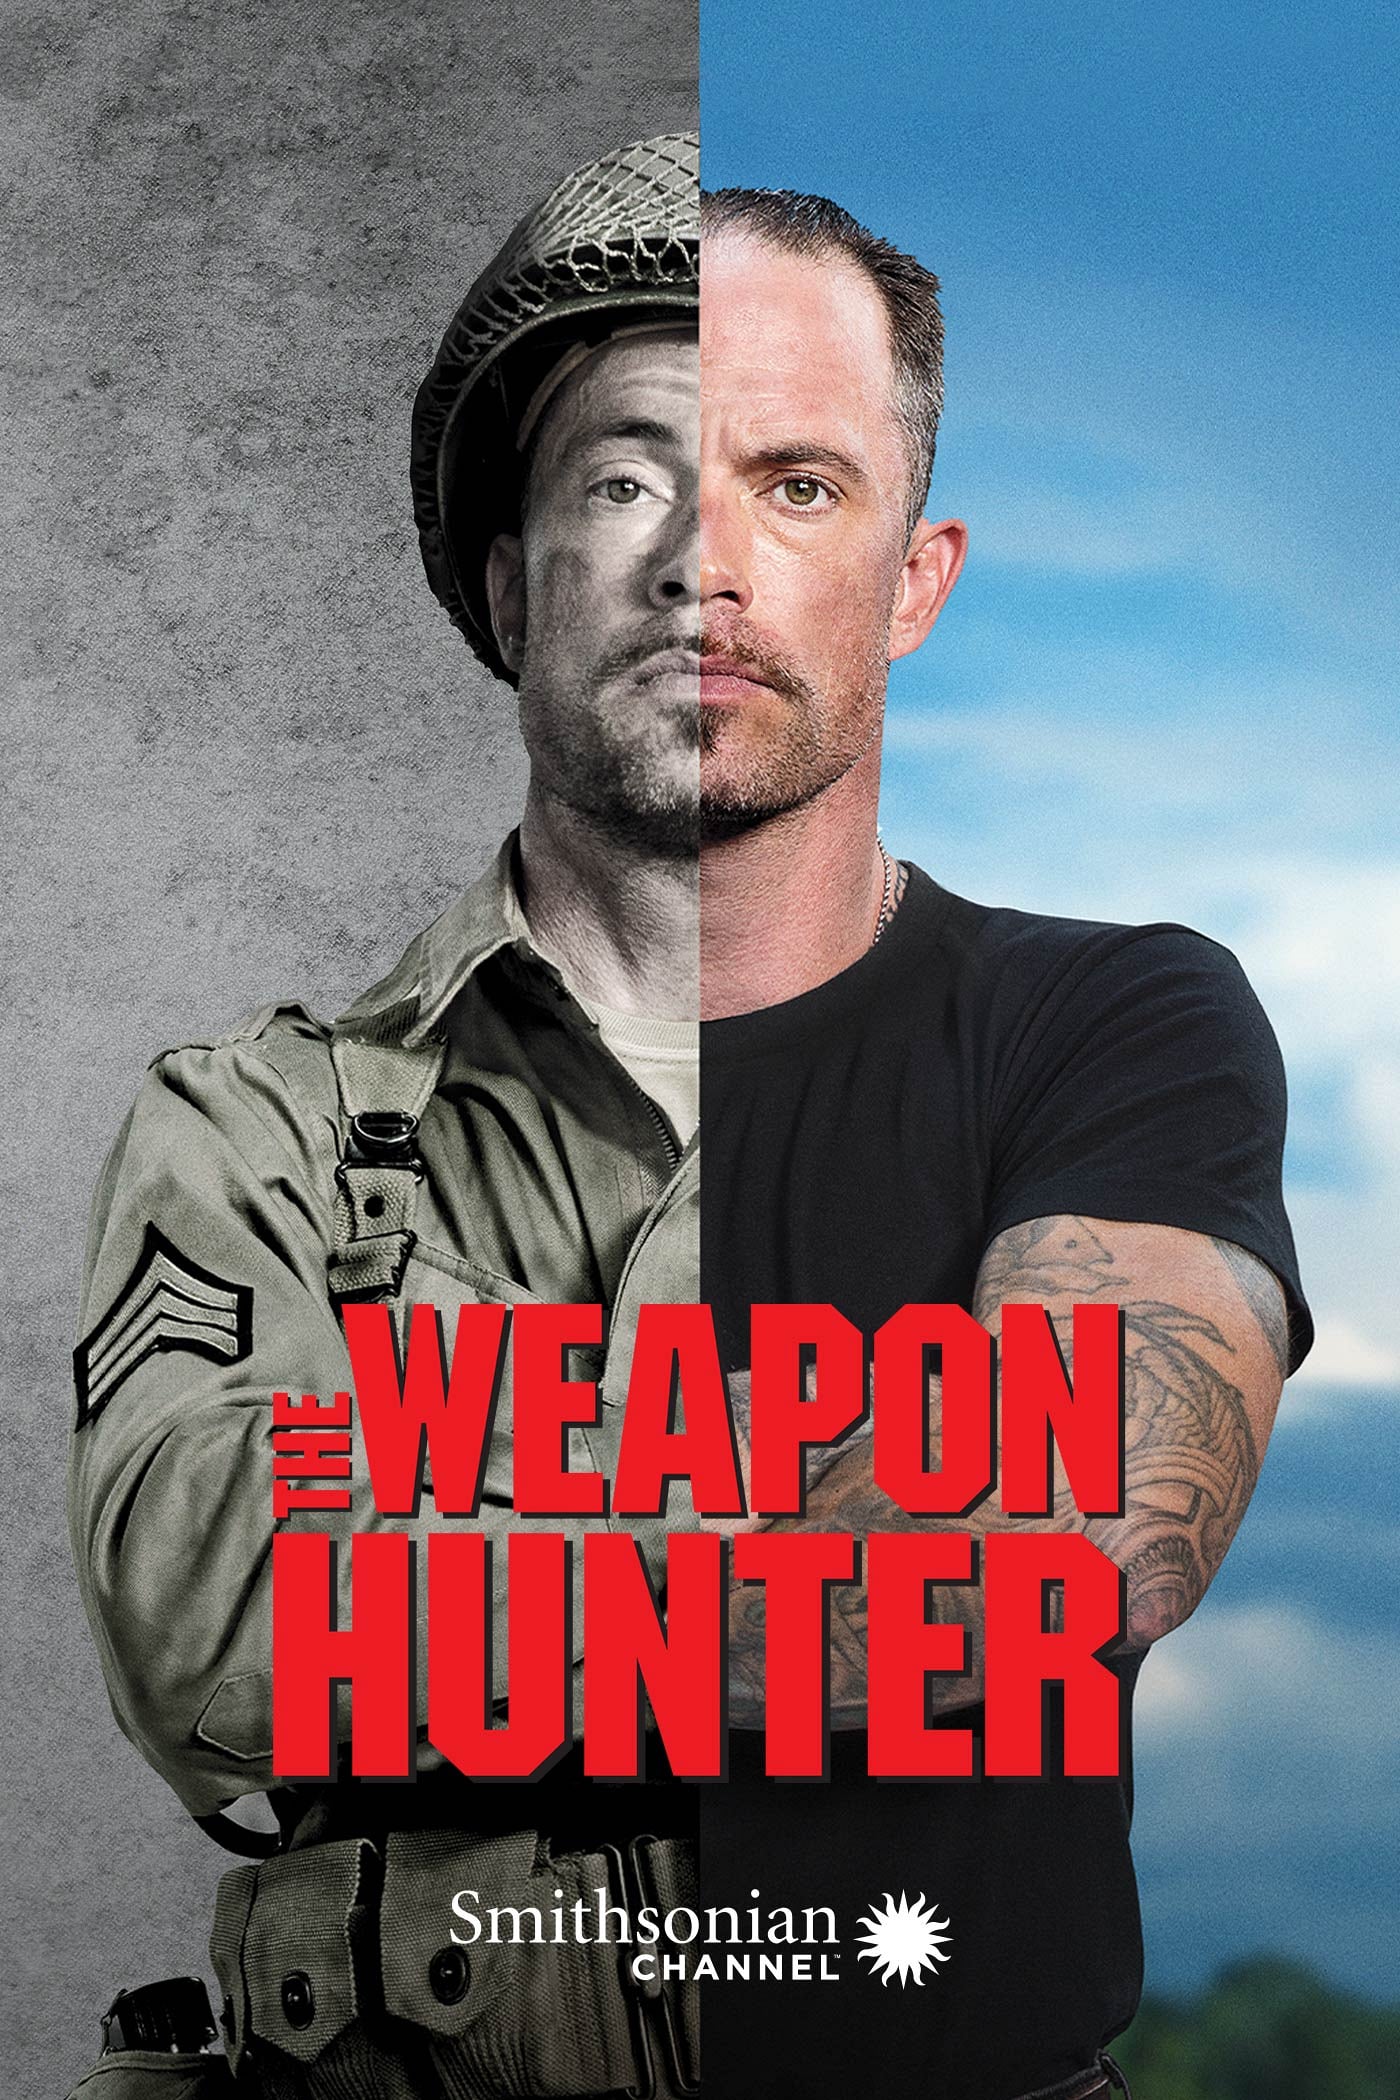 The Weapon Hunter